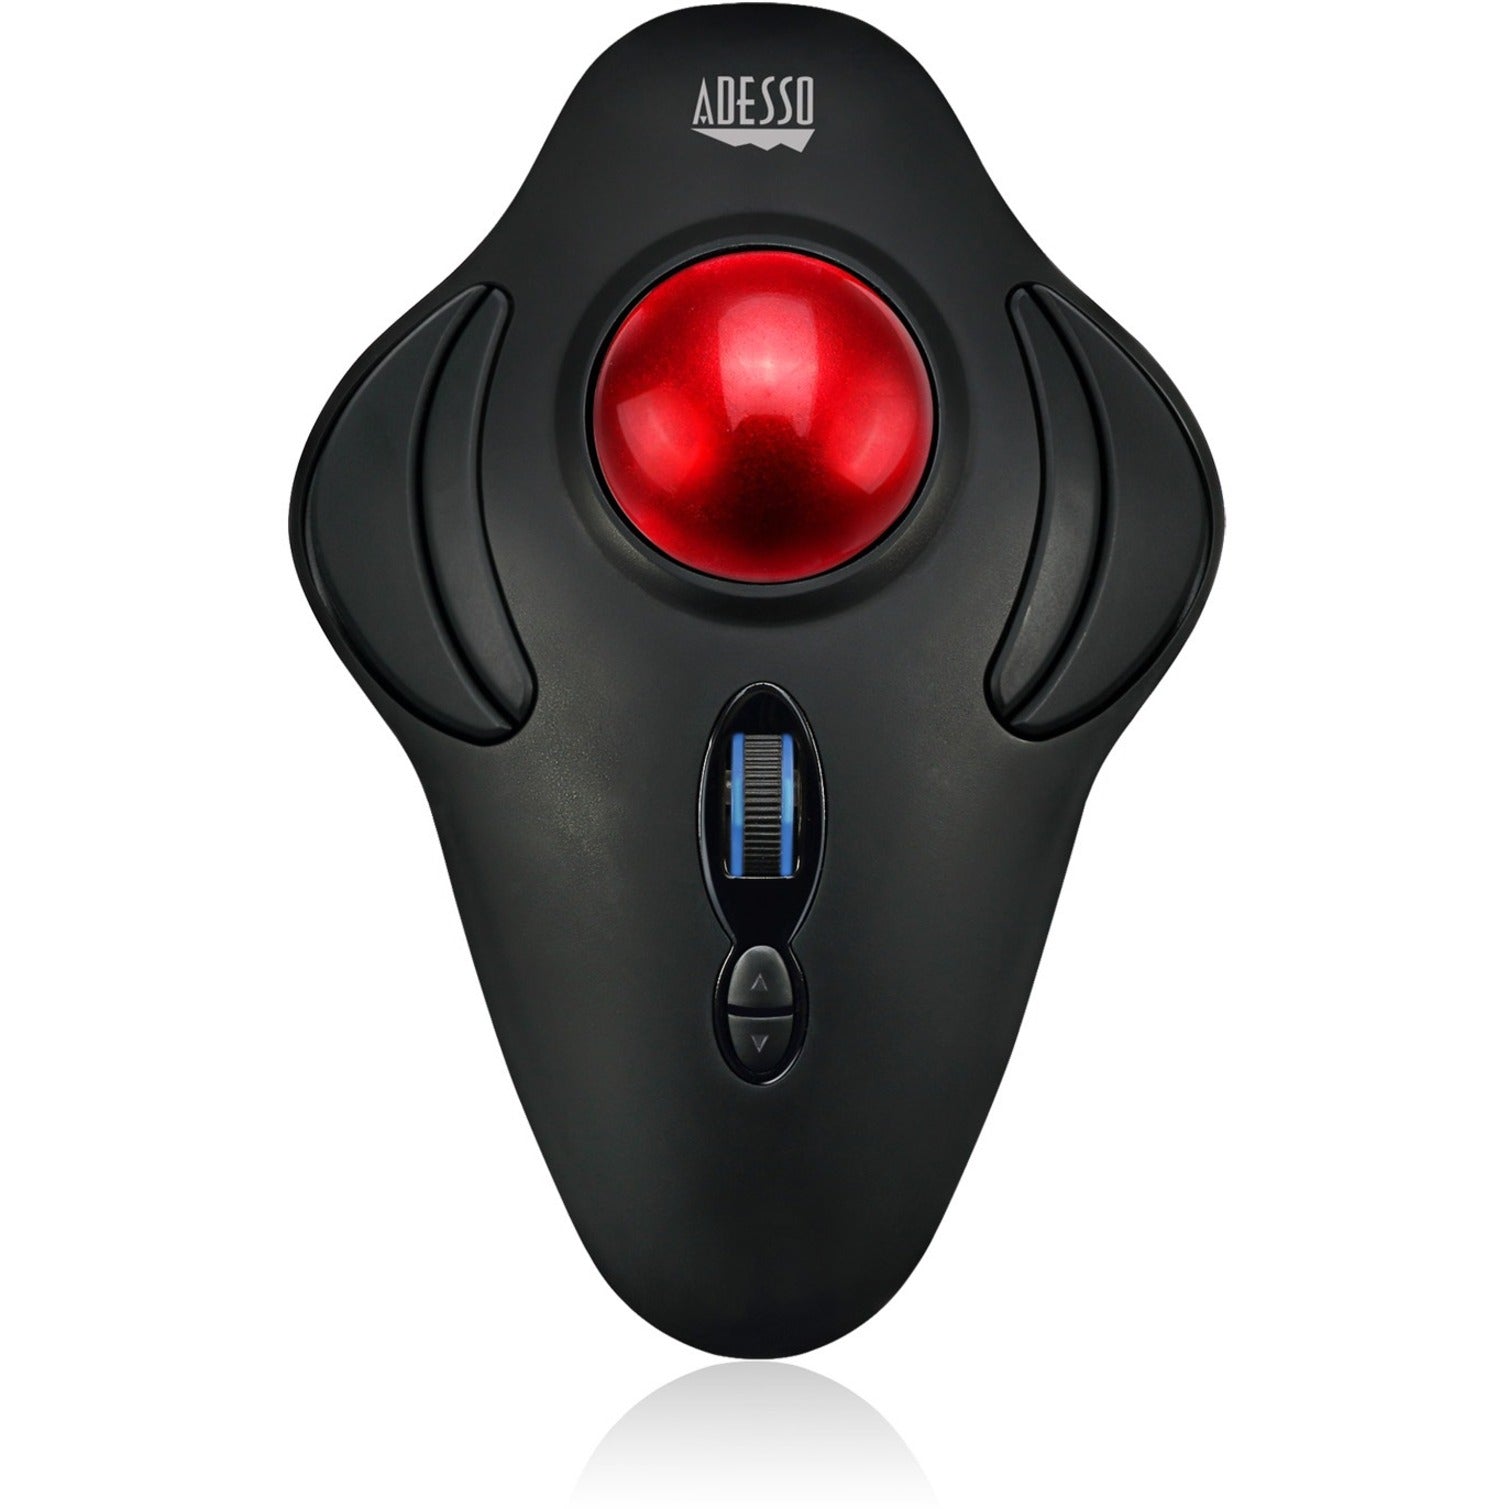 Adesso IMOUSE T40 Wireless Programmable Ergonomic Trackball Mouse, 2.4 GHz Radio Frequency, 4800 dpi